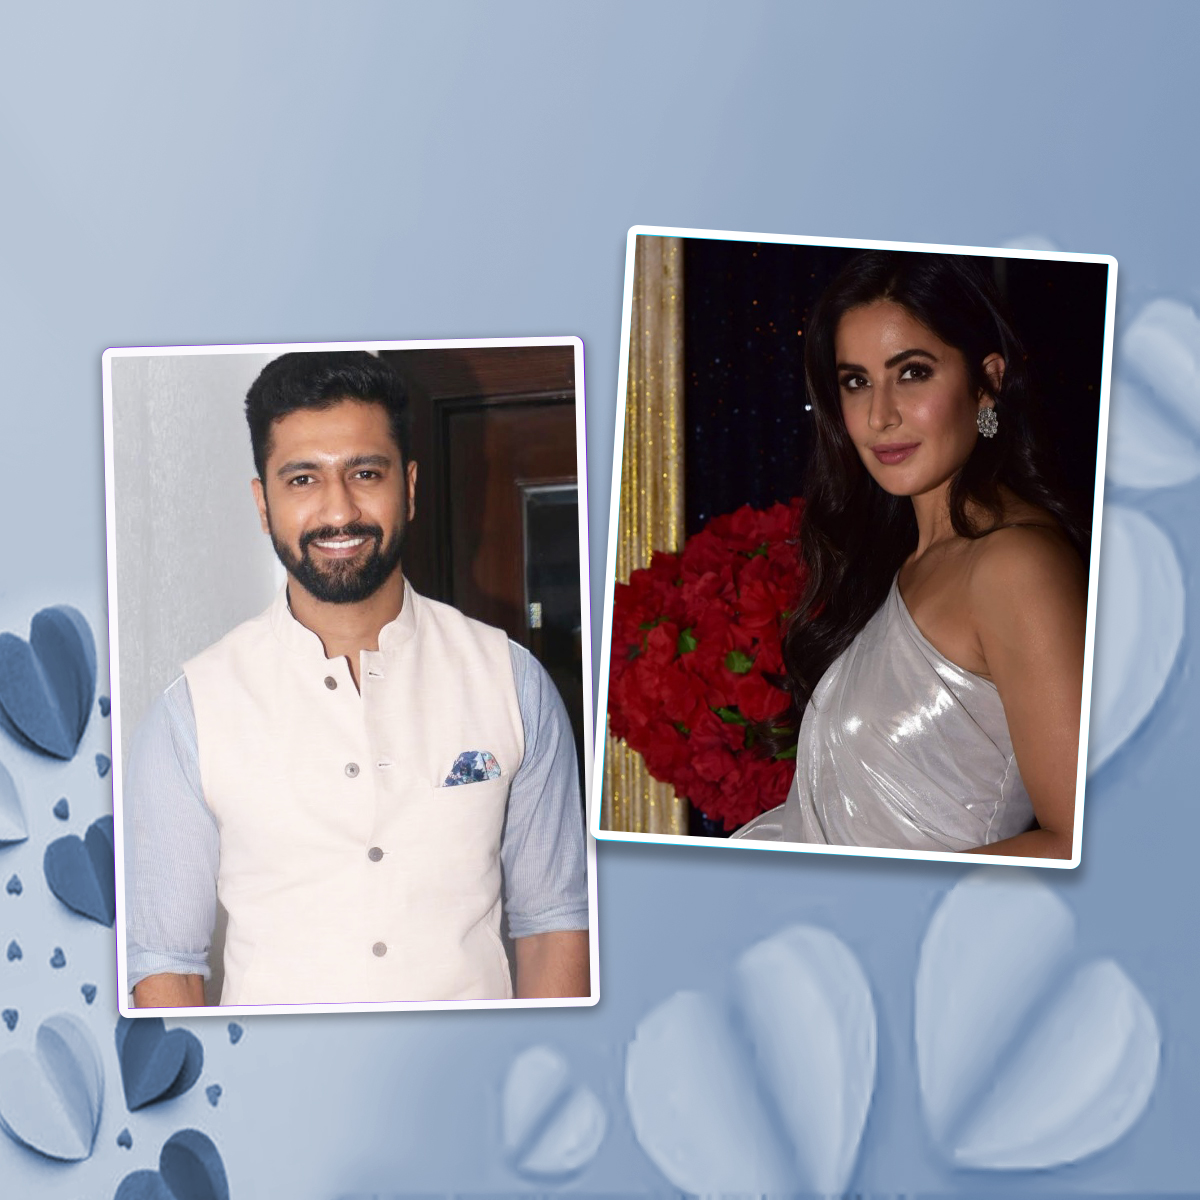 EXCLUSIVE: Katrina Kaif and Vicky Kaushal get a 100 crore offer from an OTT giant for their wedding footage